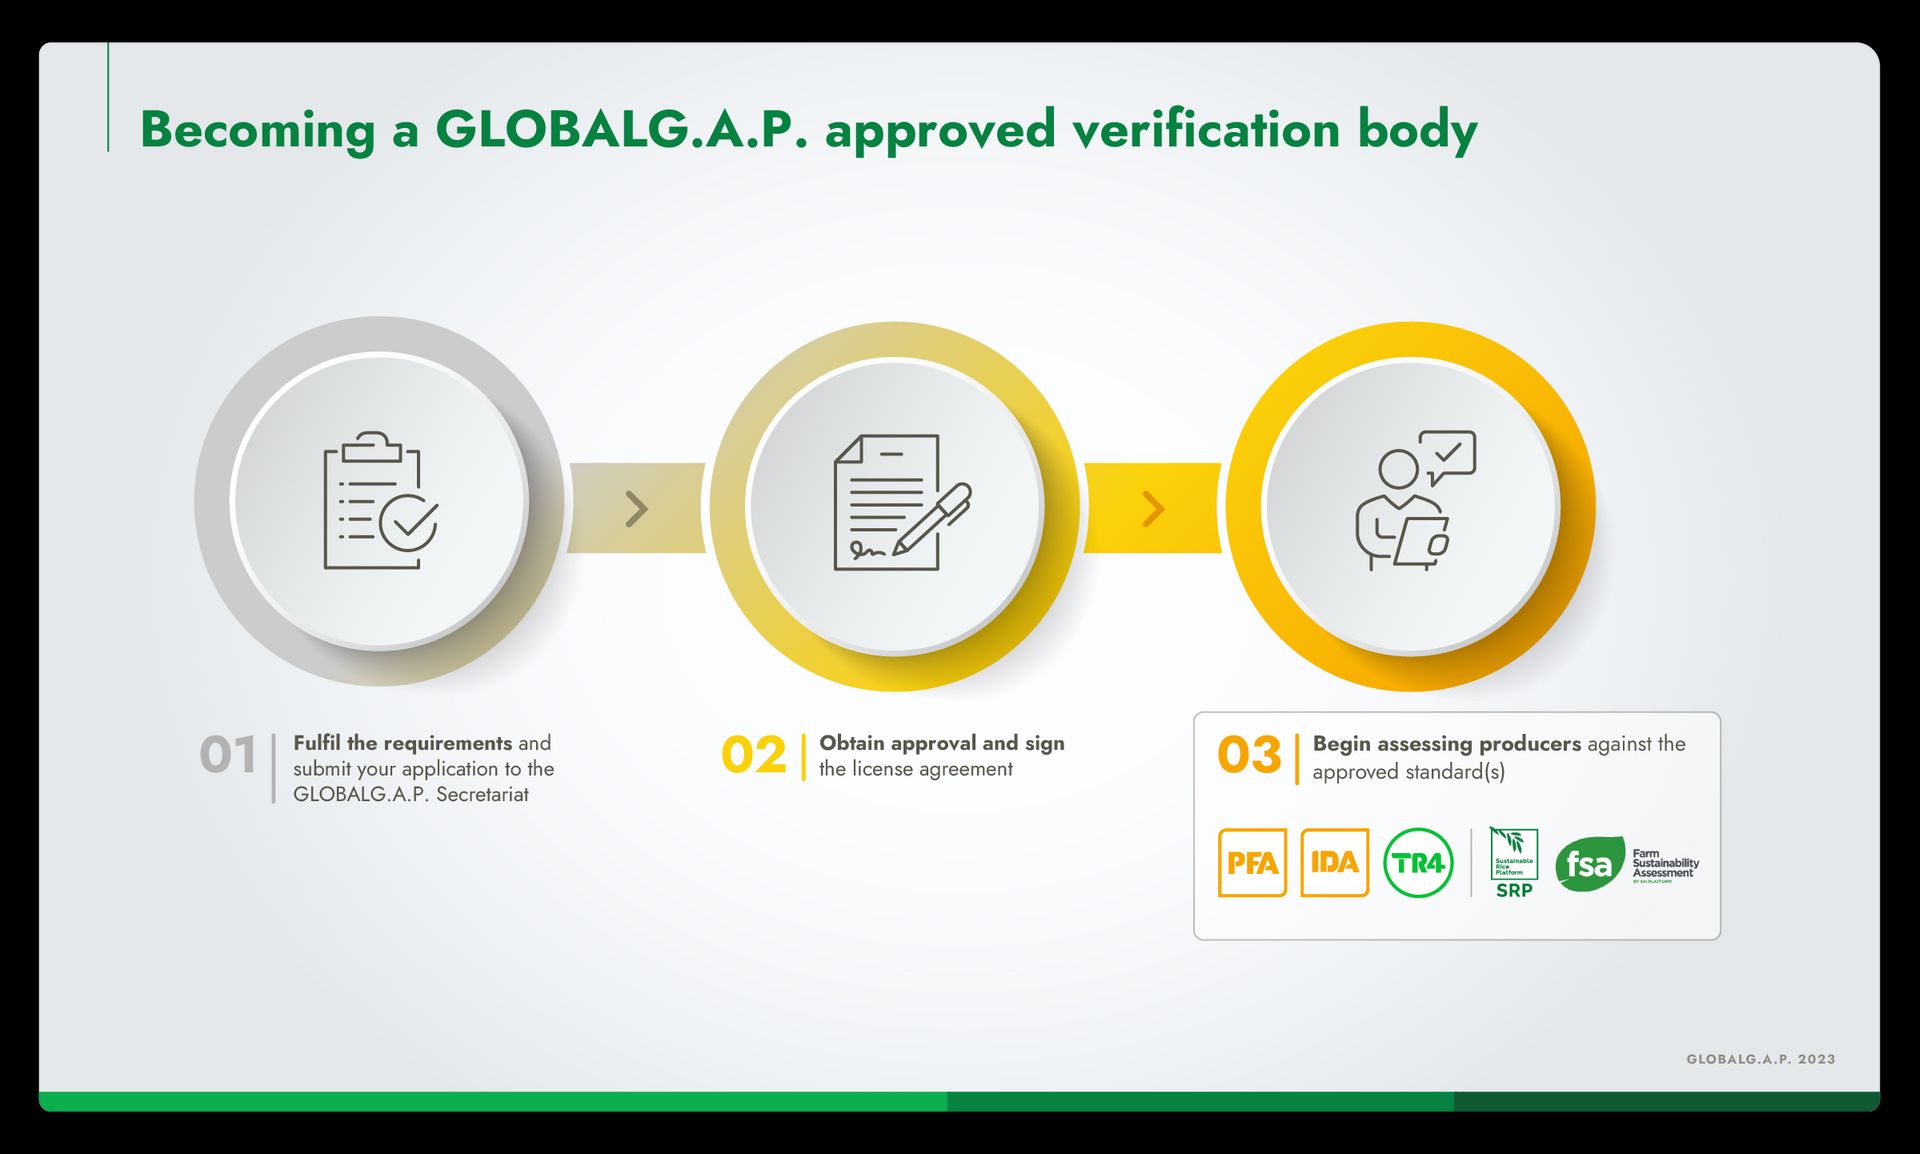 Infographic showing the process of becoming a GLOBALG.A.P. approved verification body